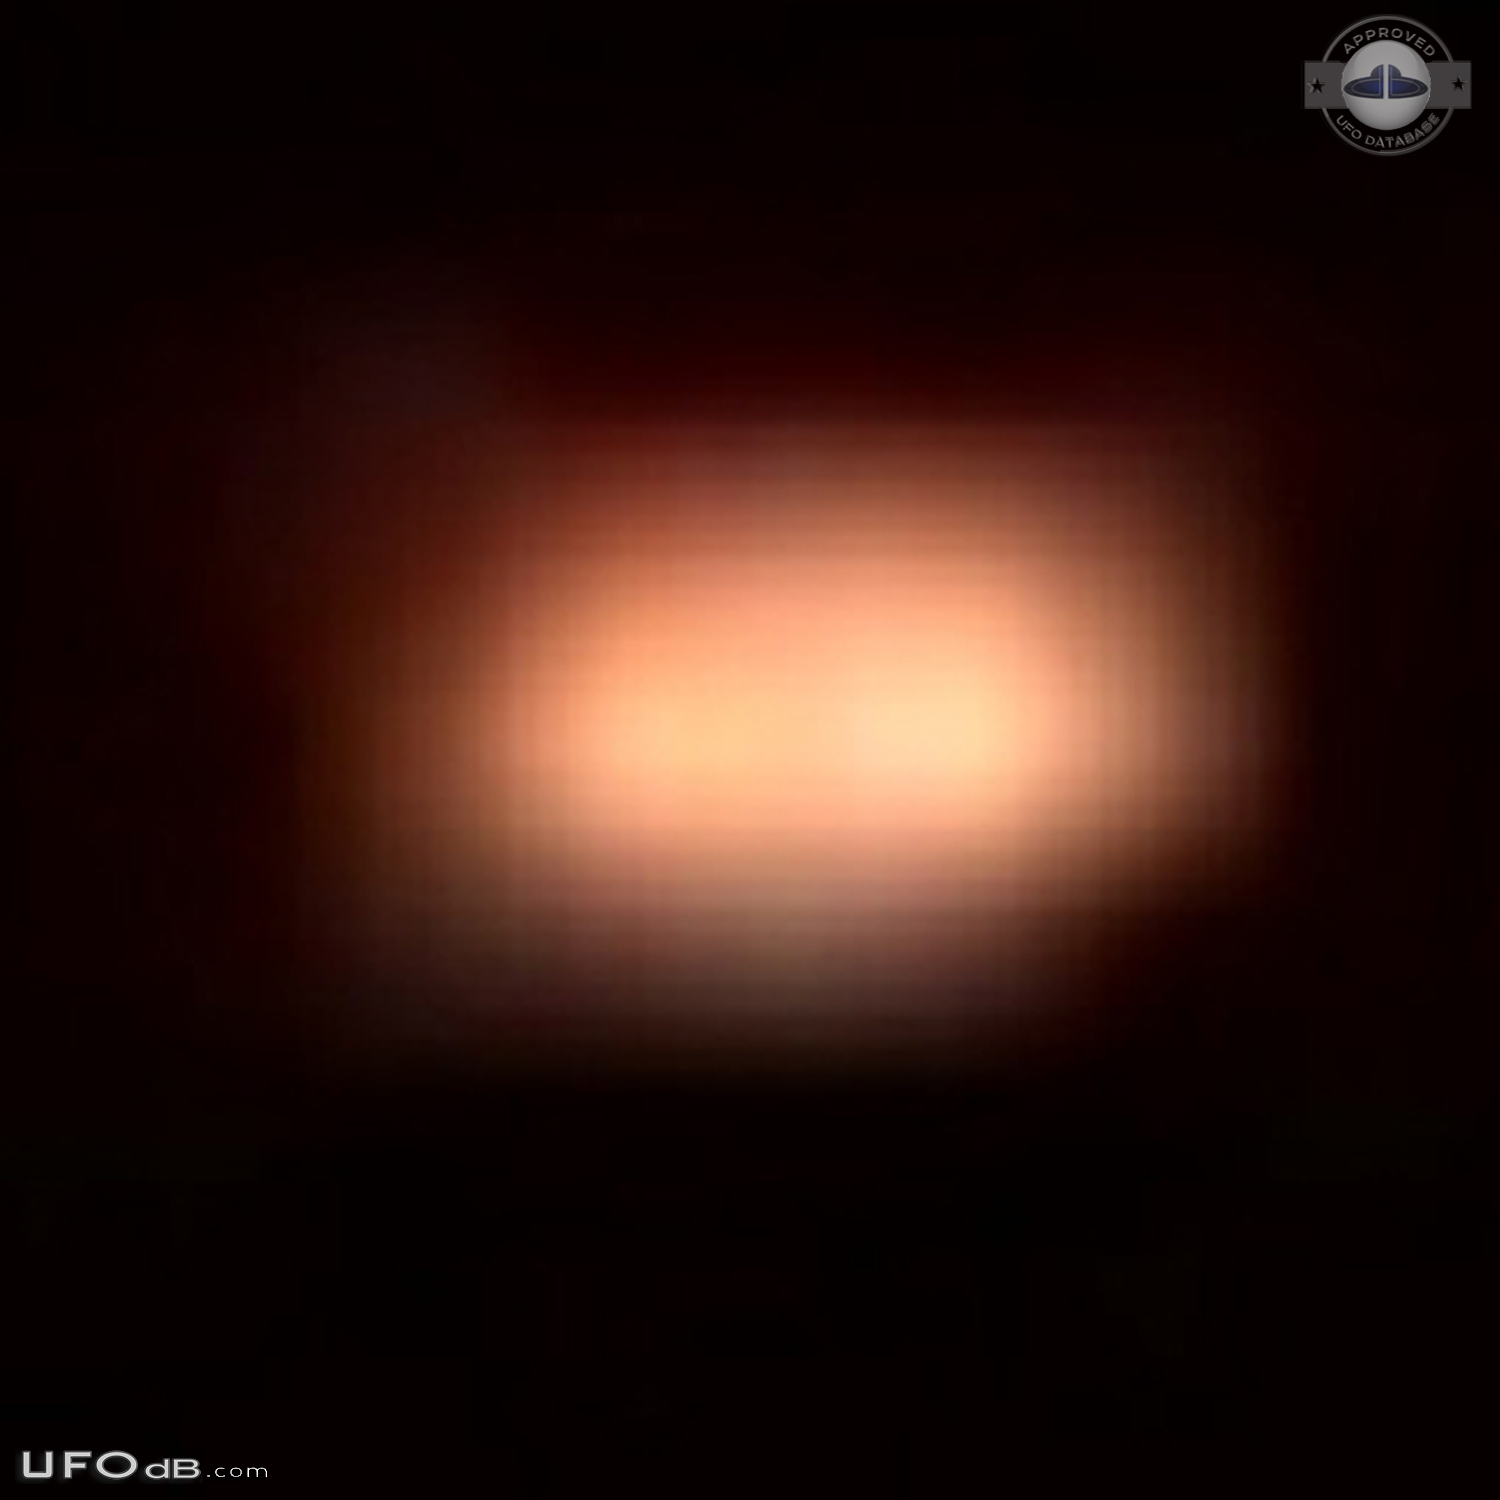 Glowing amber colored moving UFO - Kolkata, West Bengal India 2014 UFO Picture #691-4